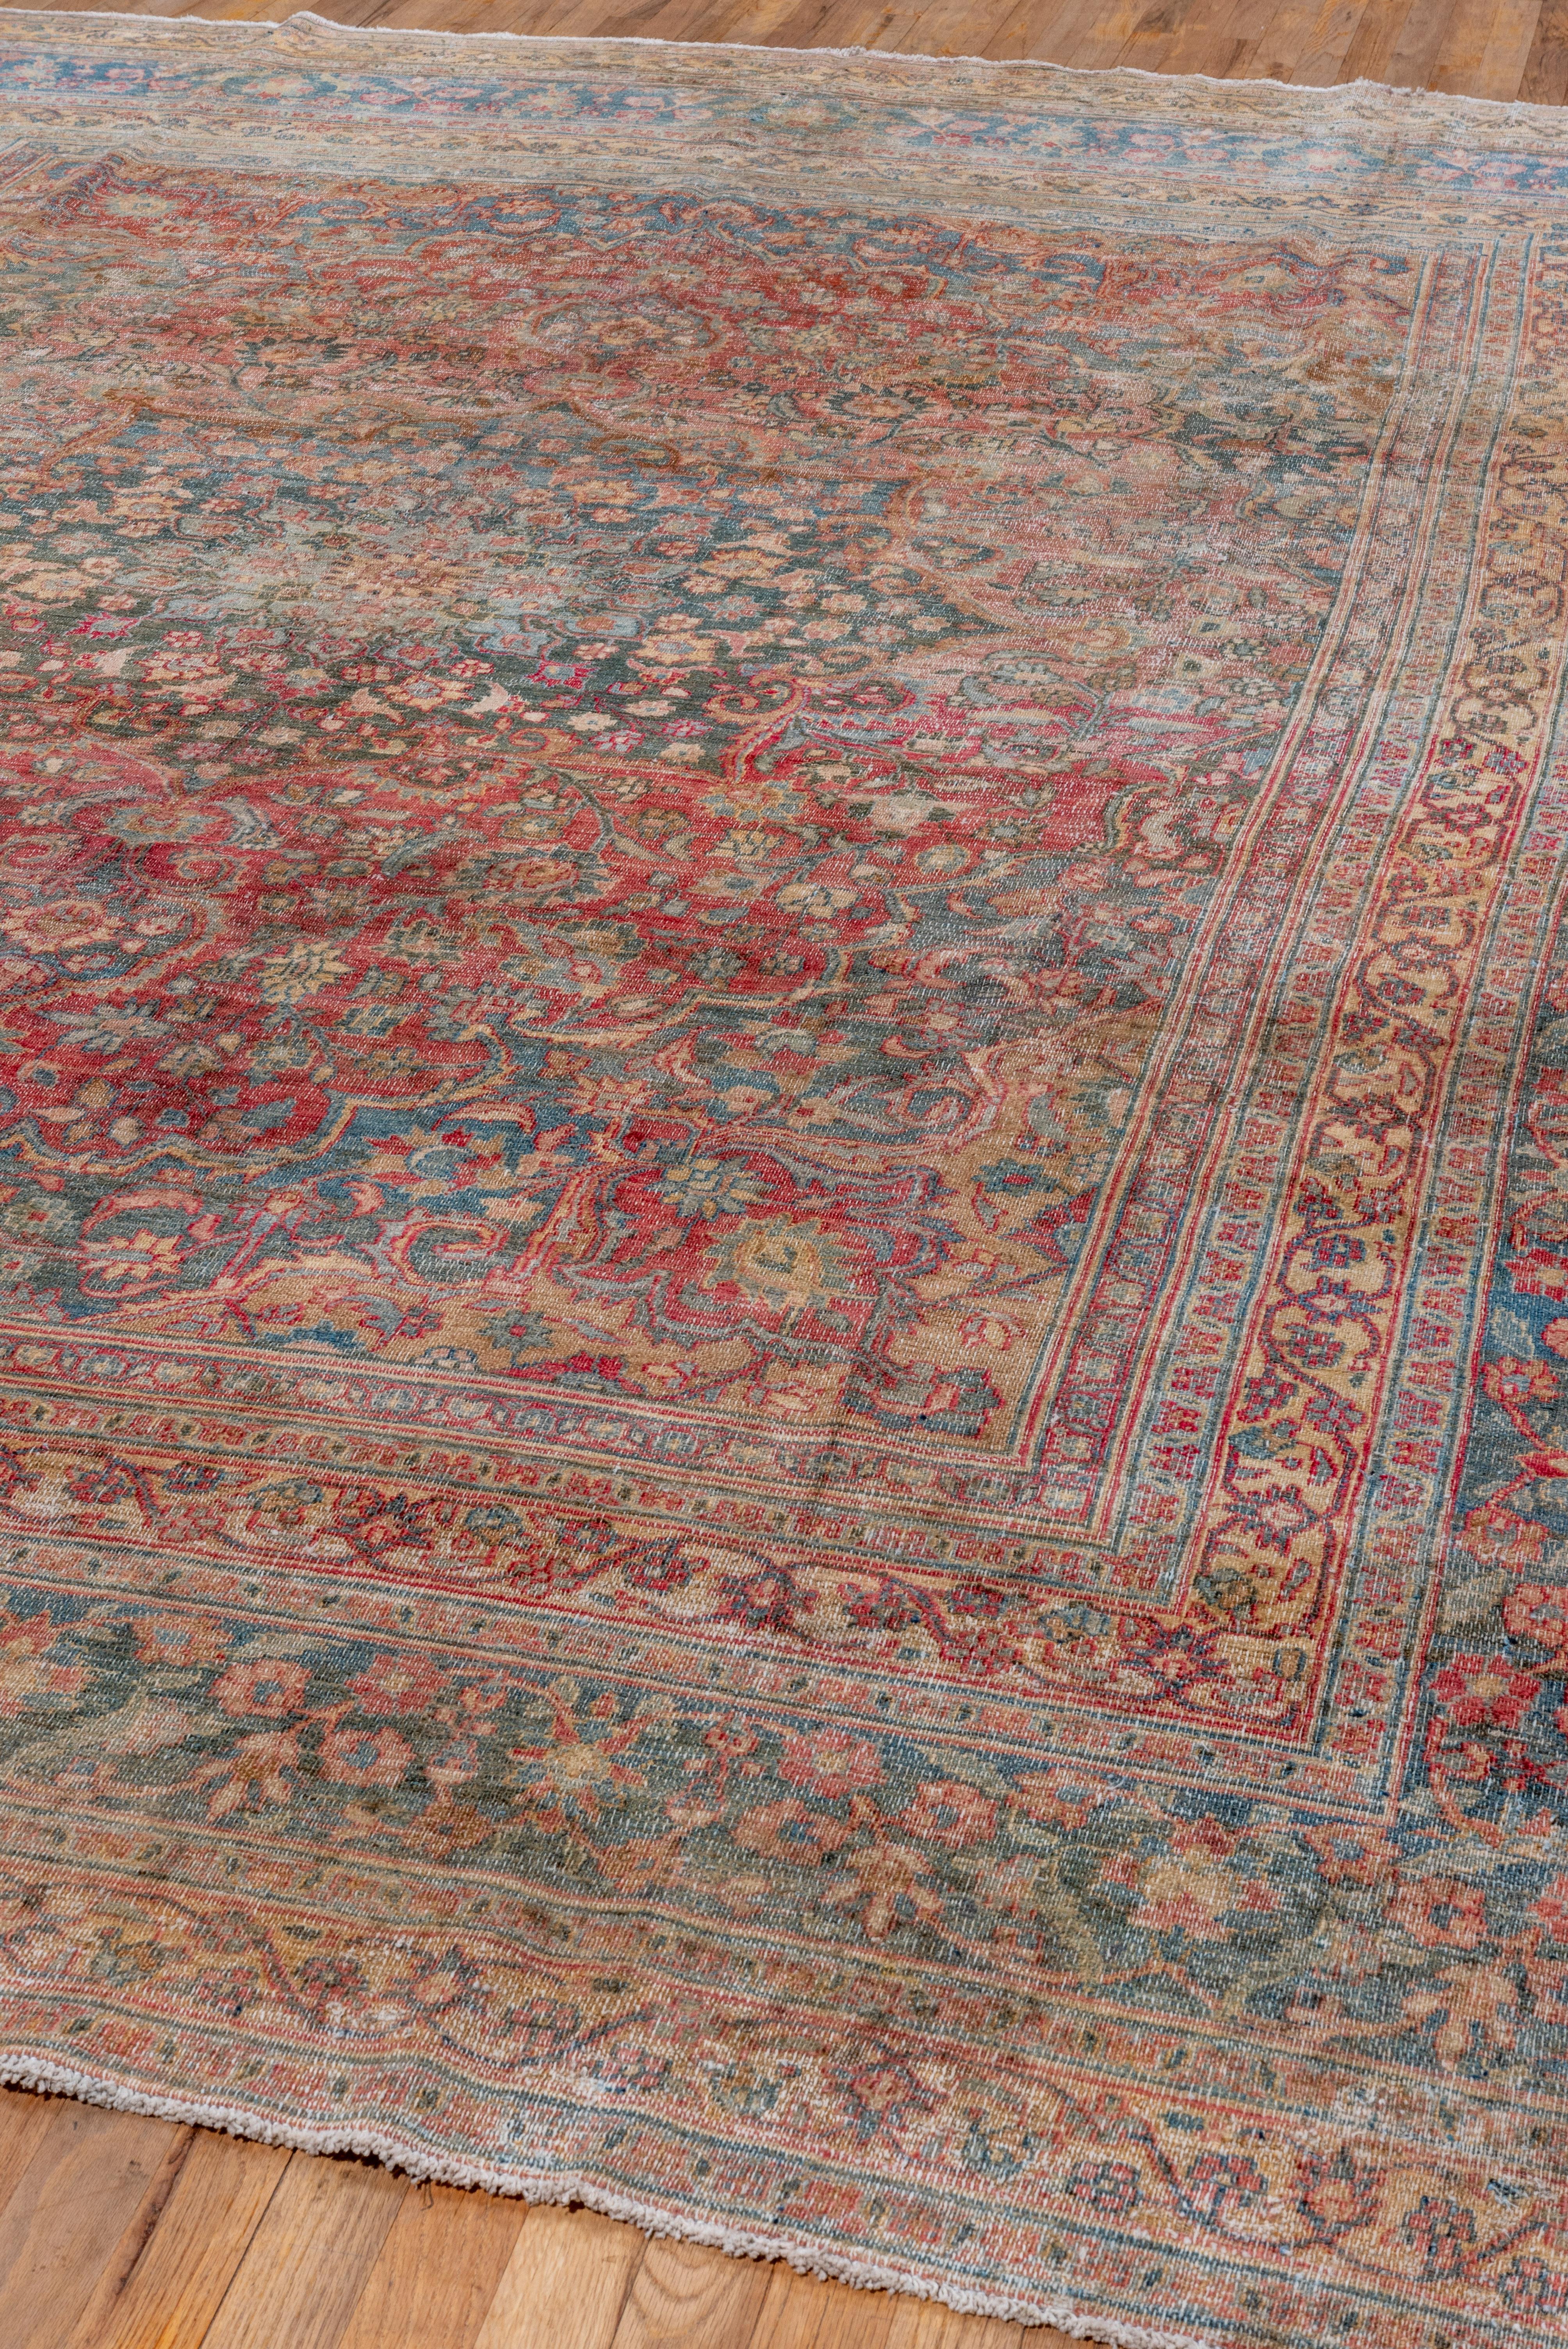 Wool Shabby Chic Persian Khorassan Rug with Pink & Teal Tones, Circa 1930s For Sale